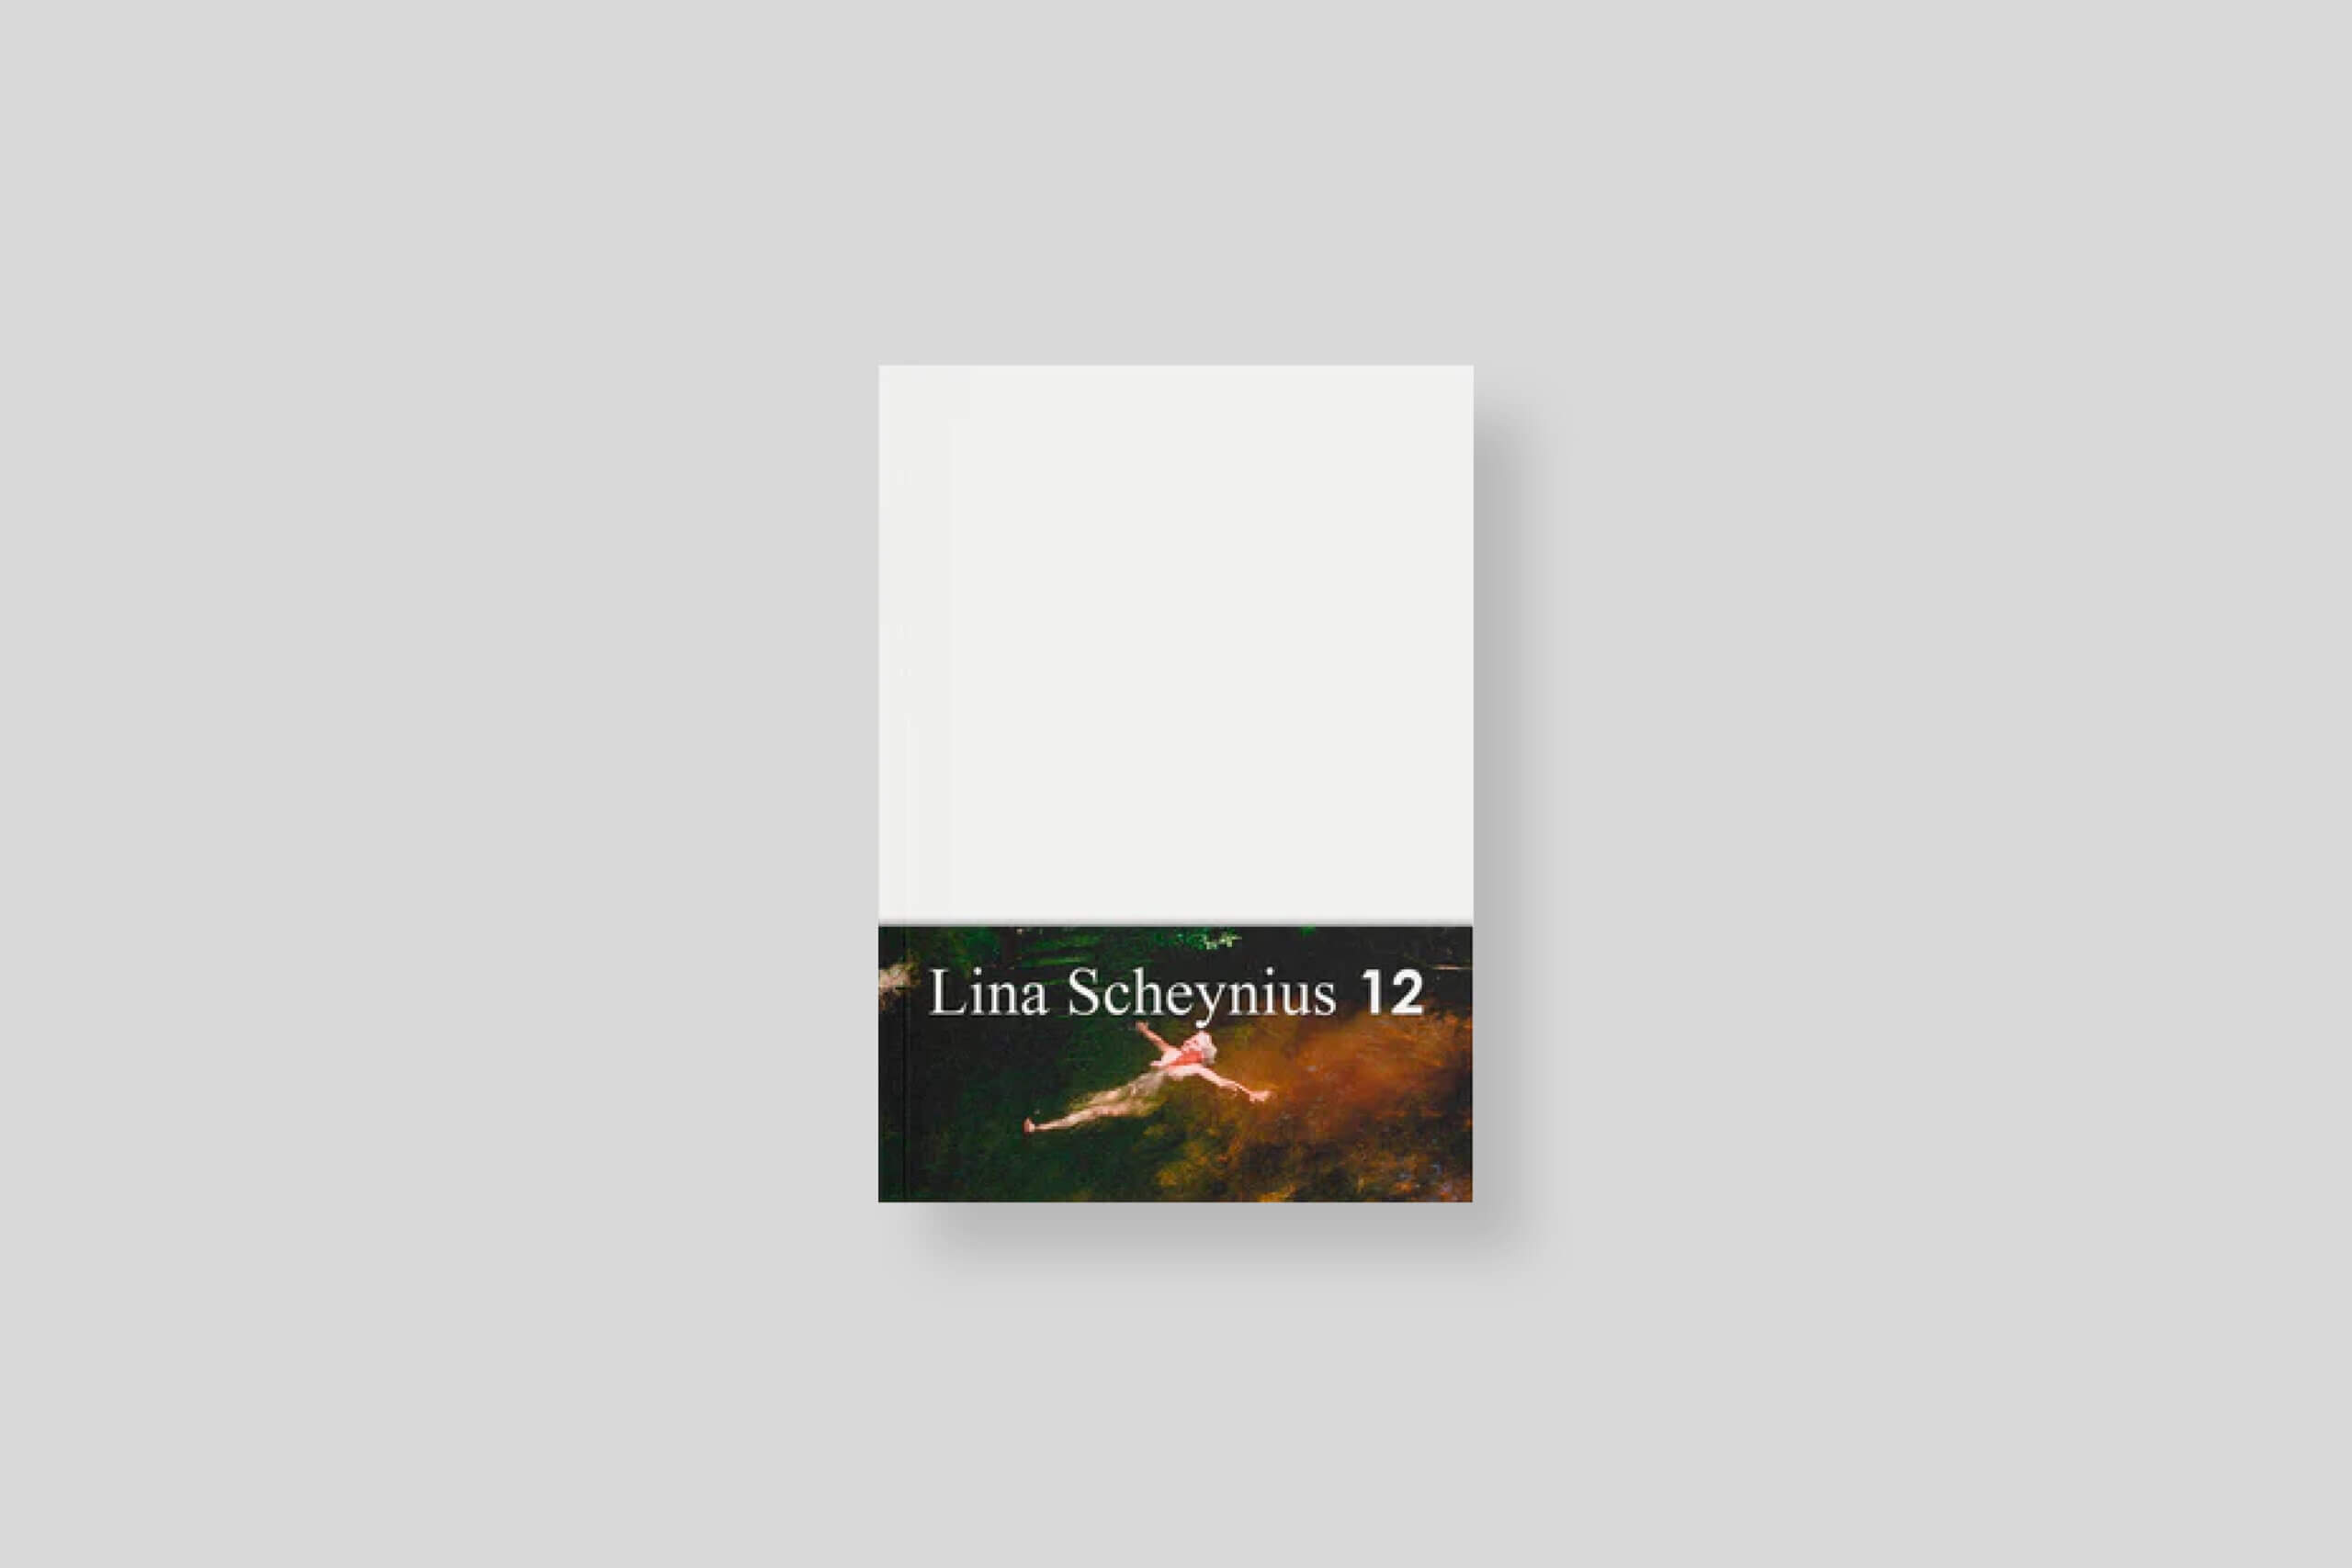 book-12-lina-scheynius-jbe-books-cover